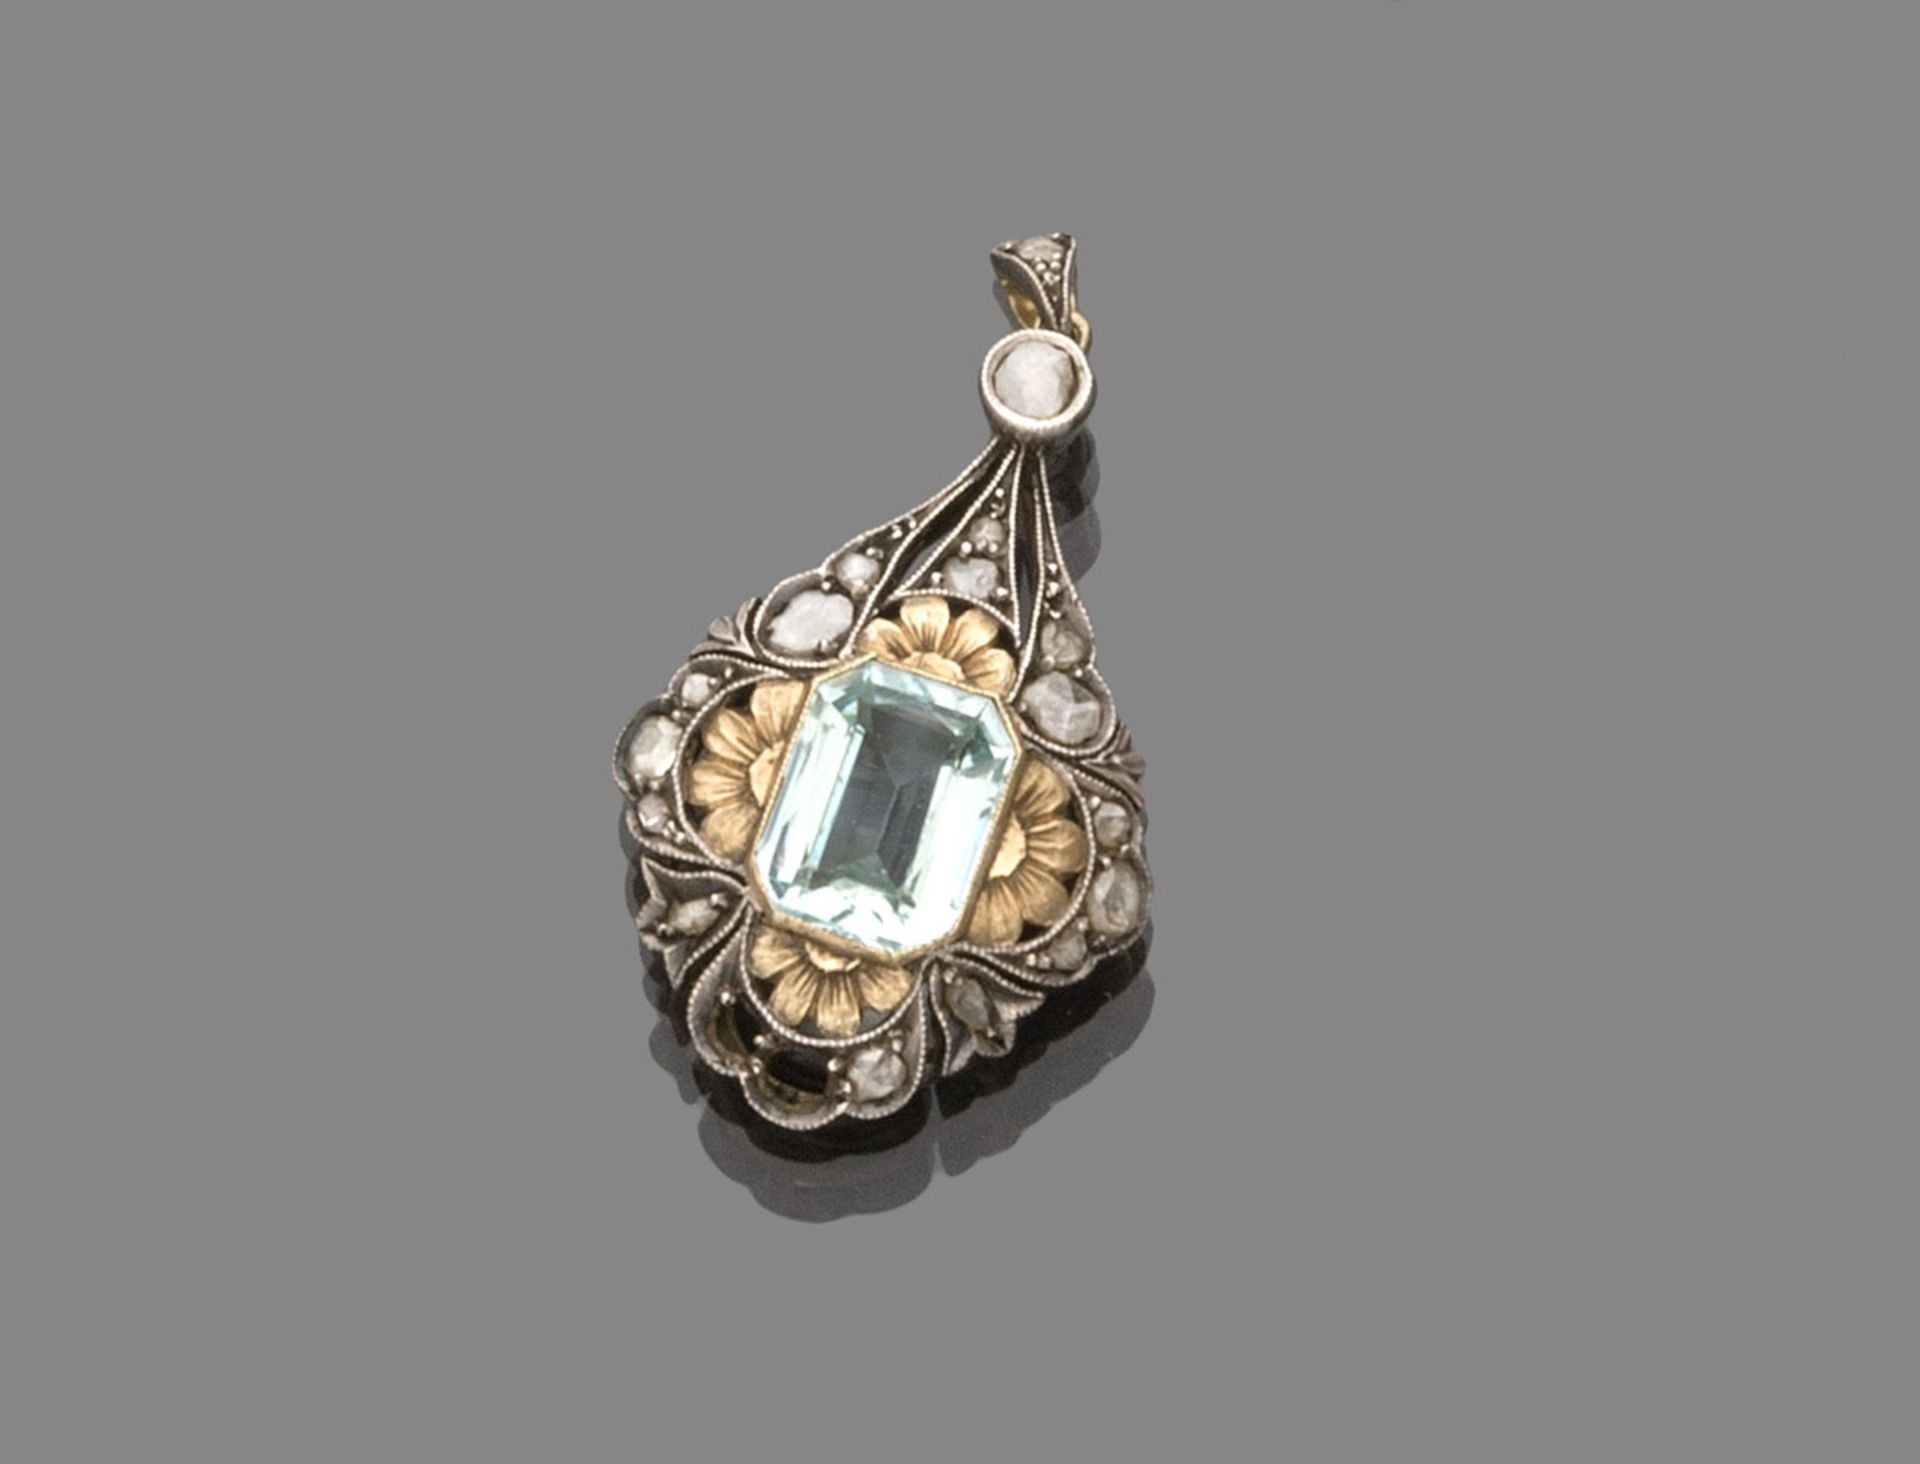 ANTIQUE PENDANT in silver and yellow gold, embellished with celestial semi-precious central stone